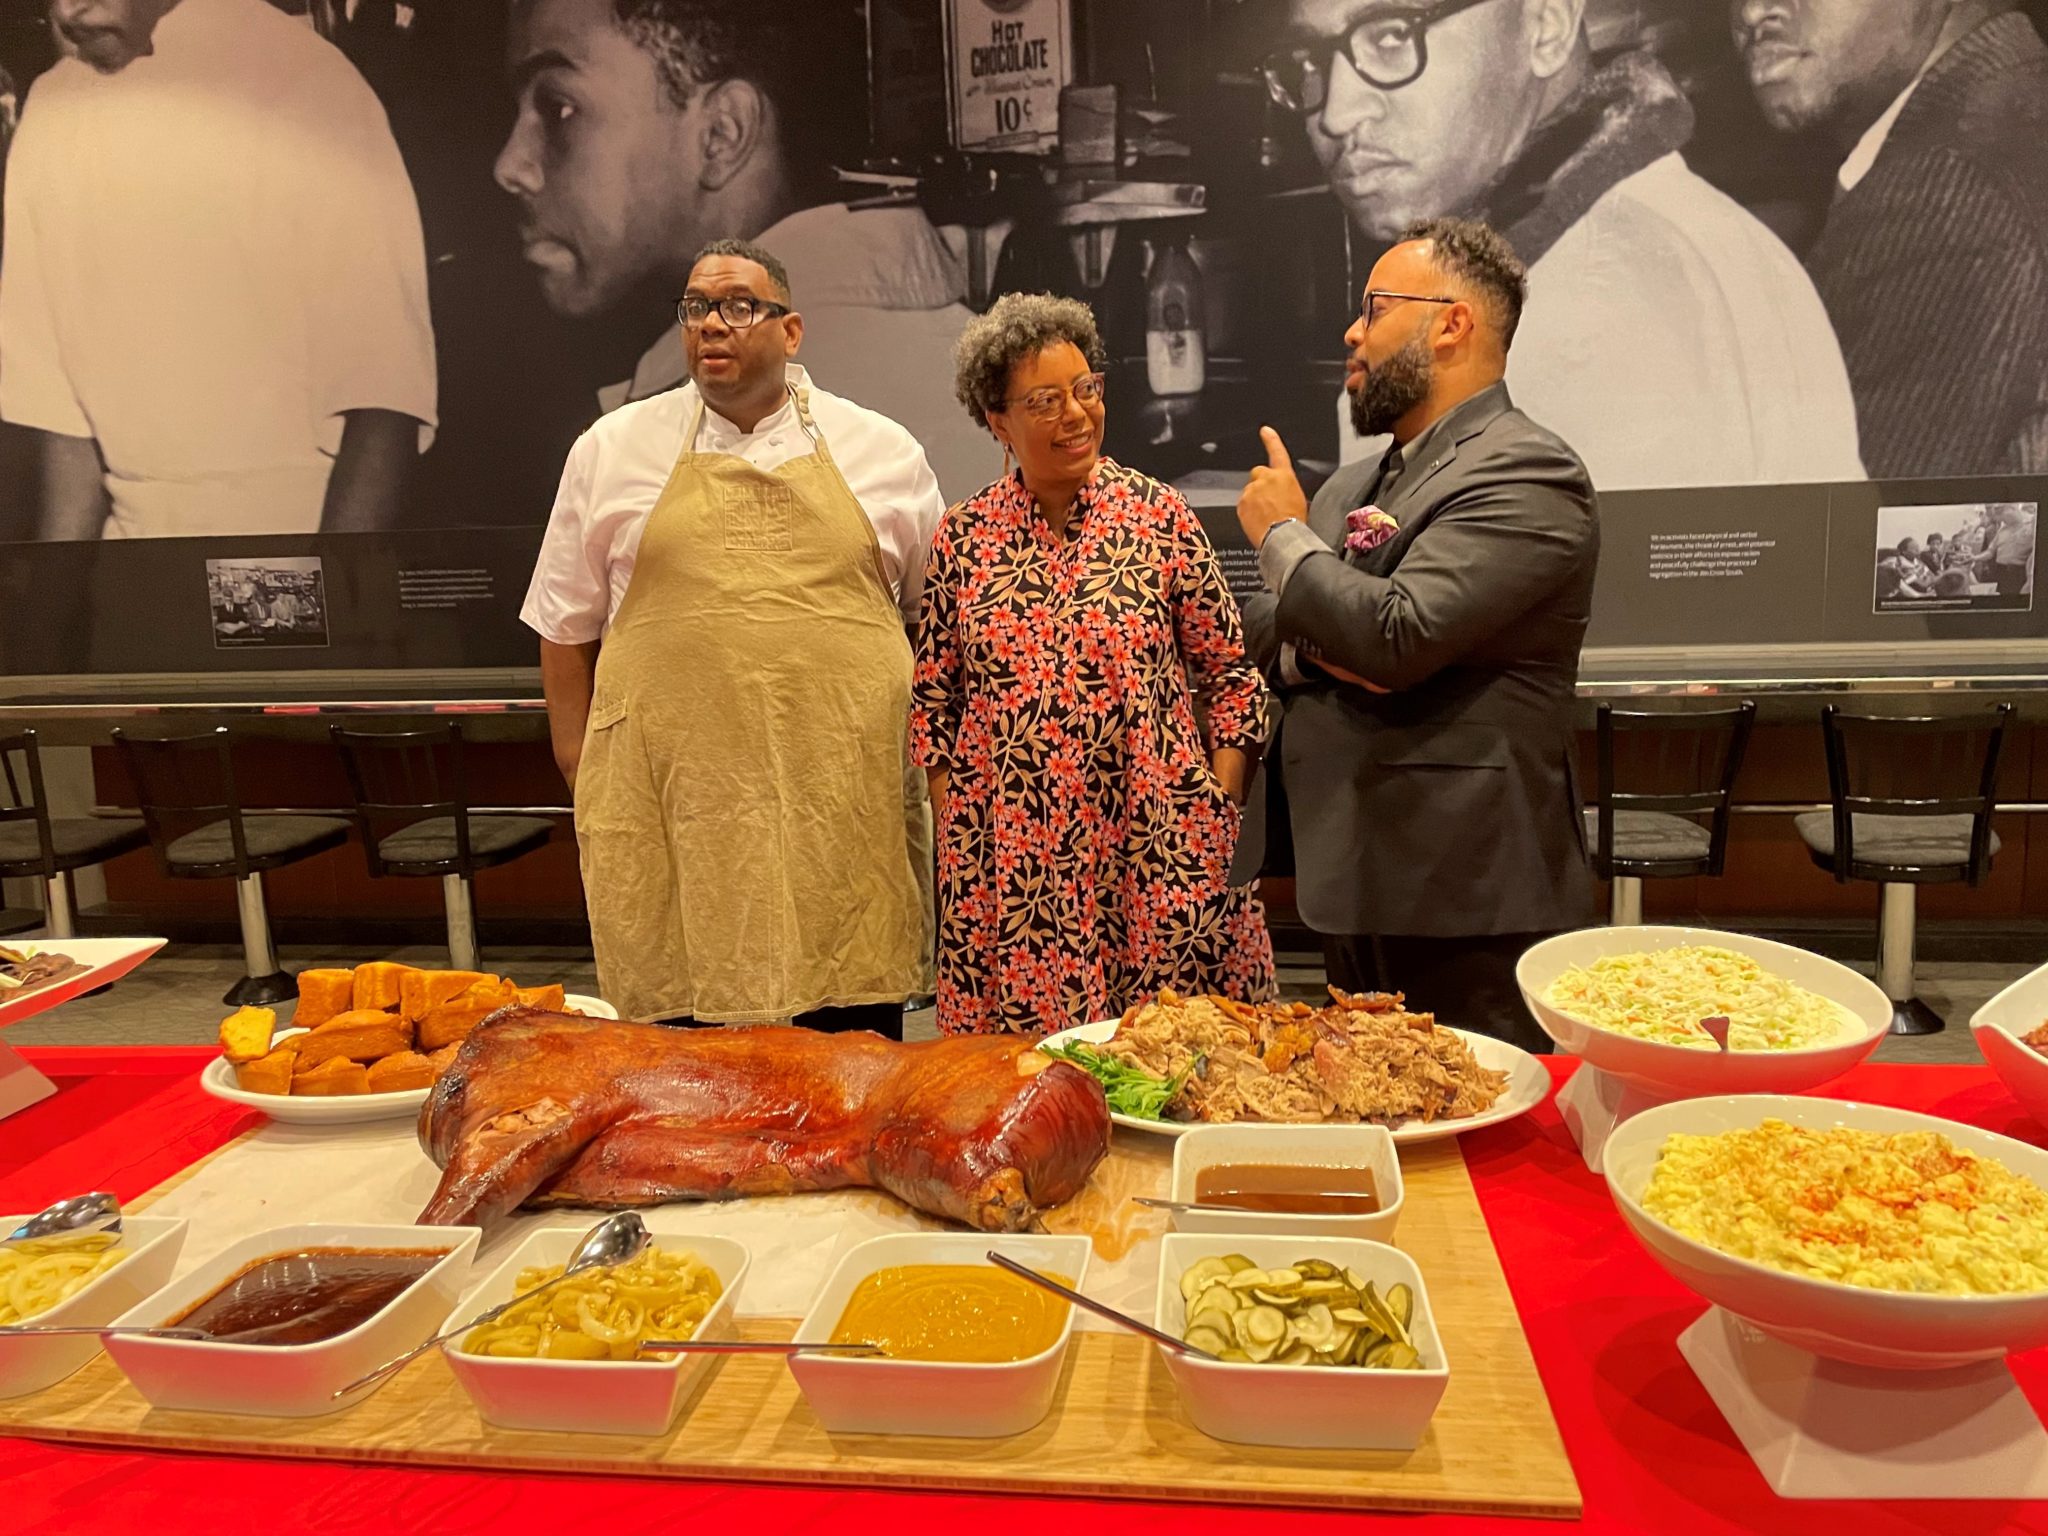 Chef Ramin Coles, Joanne Hyppolite a Jason Spear on media day discussing the special menu for Juneteenth. (Photo: Restaurant Associates)